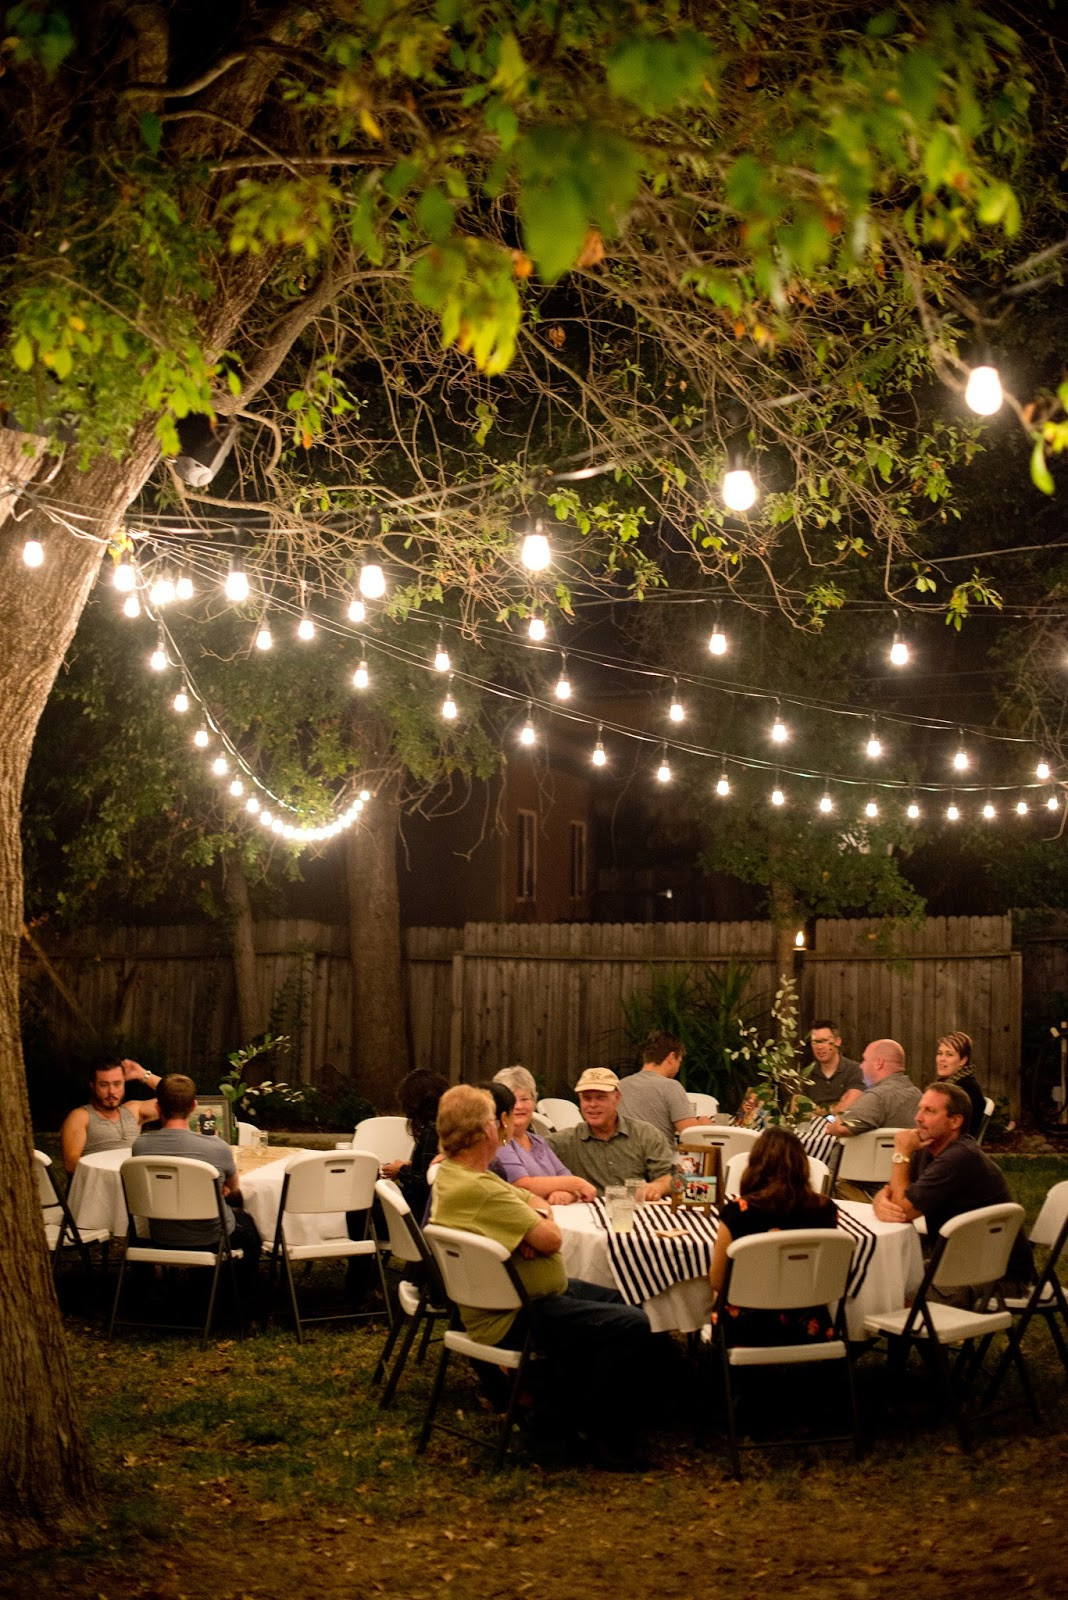 Party In Backyard Ideas
 Domestic Fashionista Backyard Birthday Party For the Guy